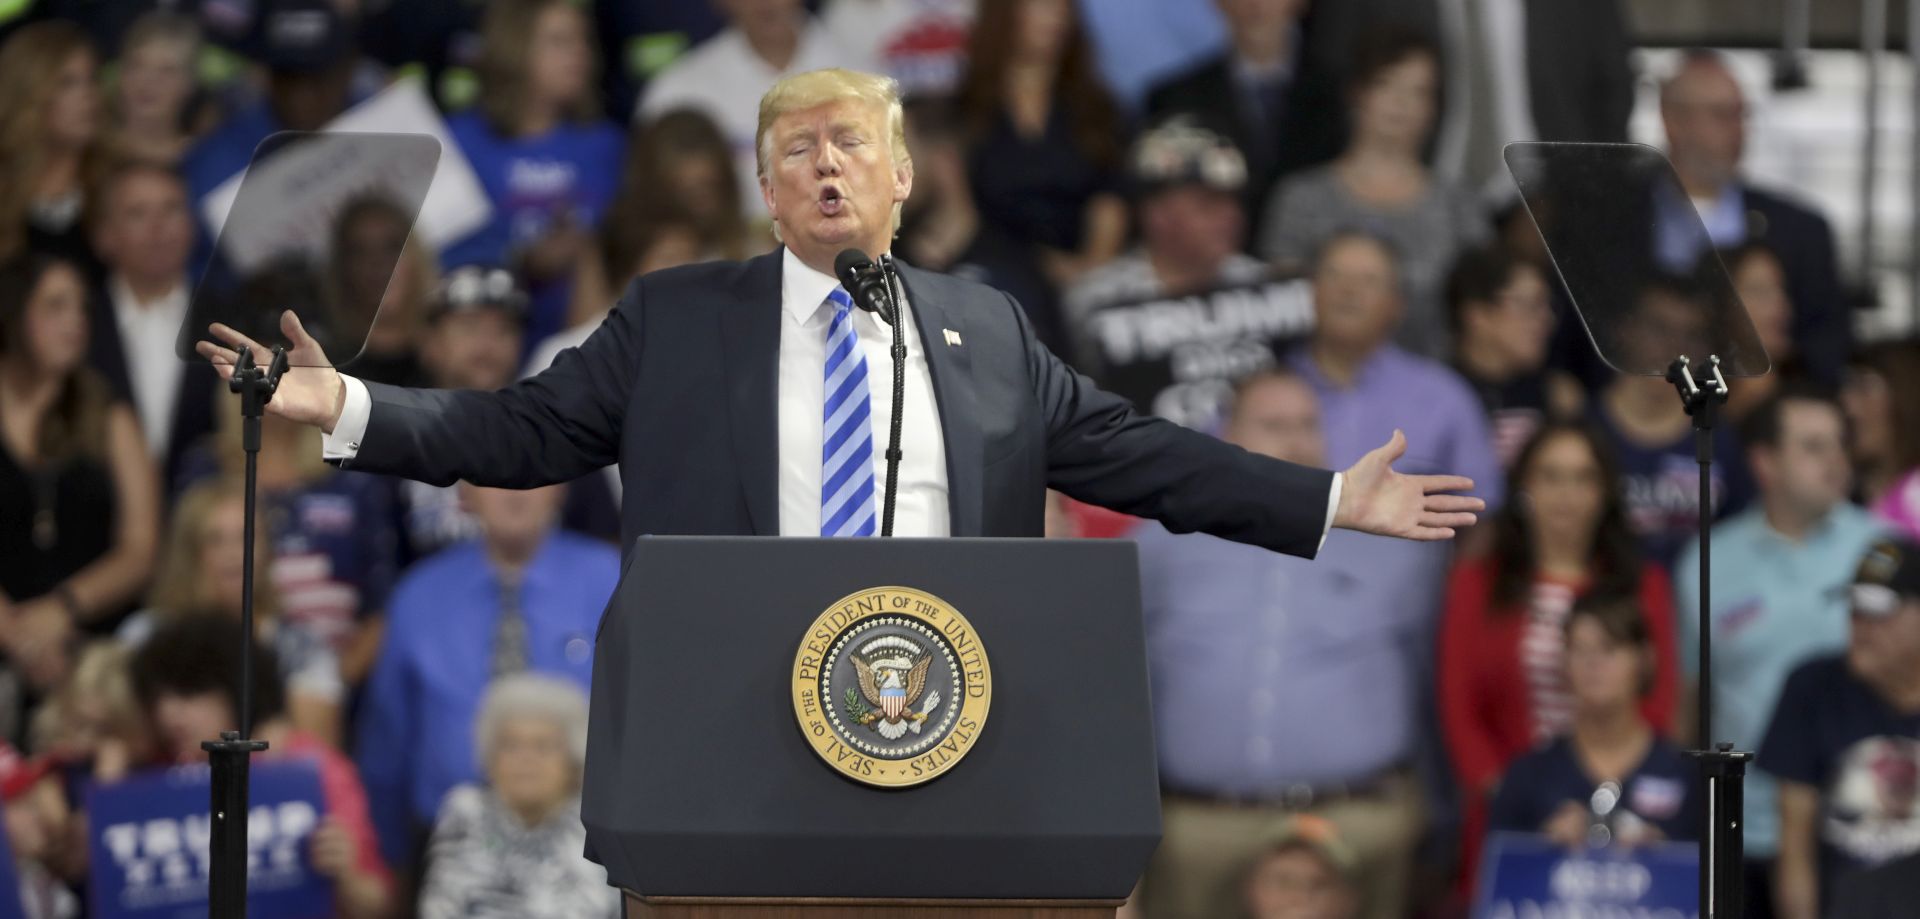 epa06963358 United States President Donald J. Trump speaks to supporters during a rally at the Charleston Civic Center in Charleston, West Virginia, USA, 21 August 2018. Trump is slated to appear at up to eight Make America Great Again rallies and more than a dozen fundraisers in the next six weeks.  EPA/MARK LYONS